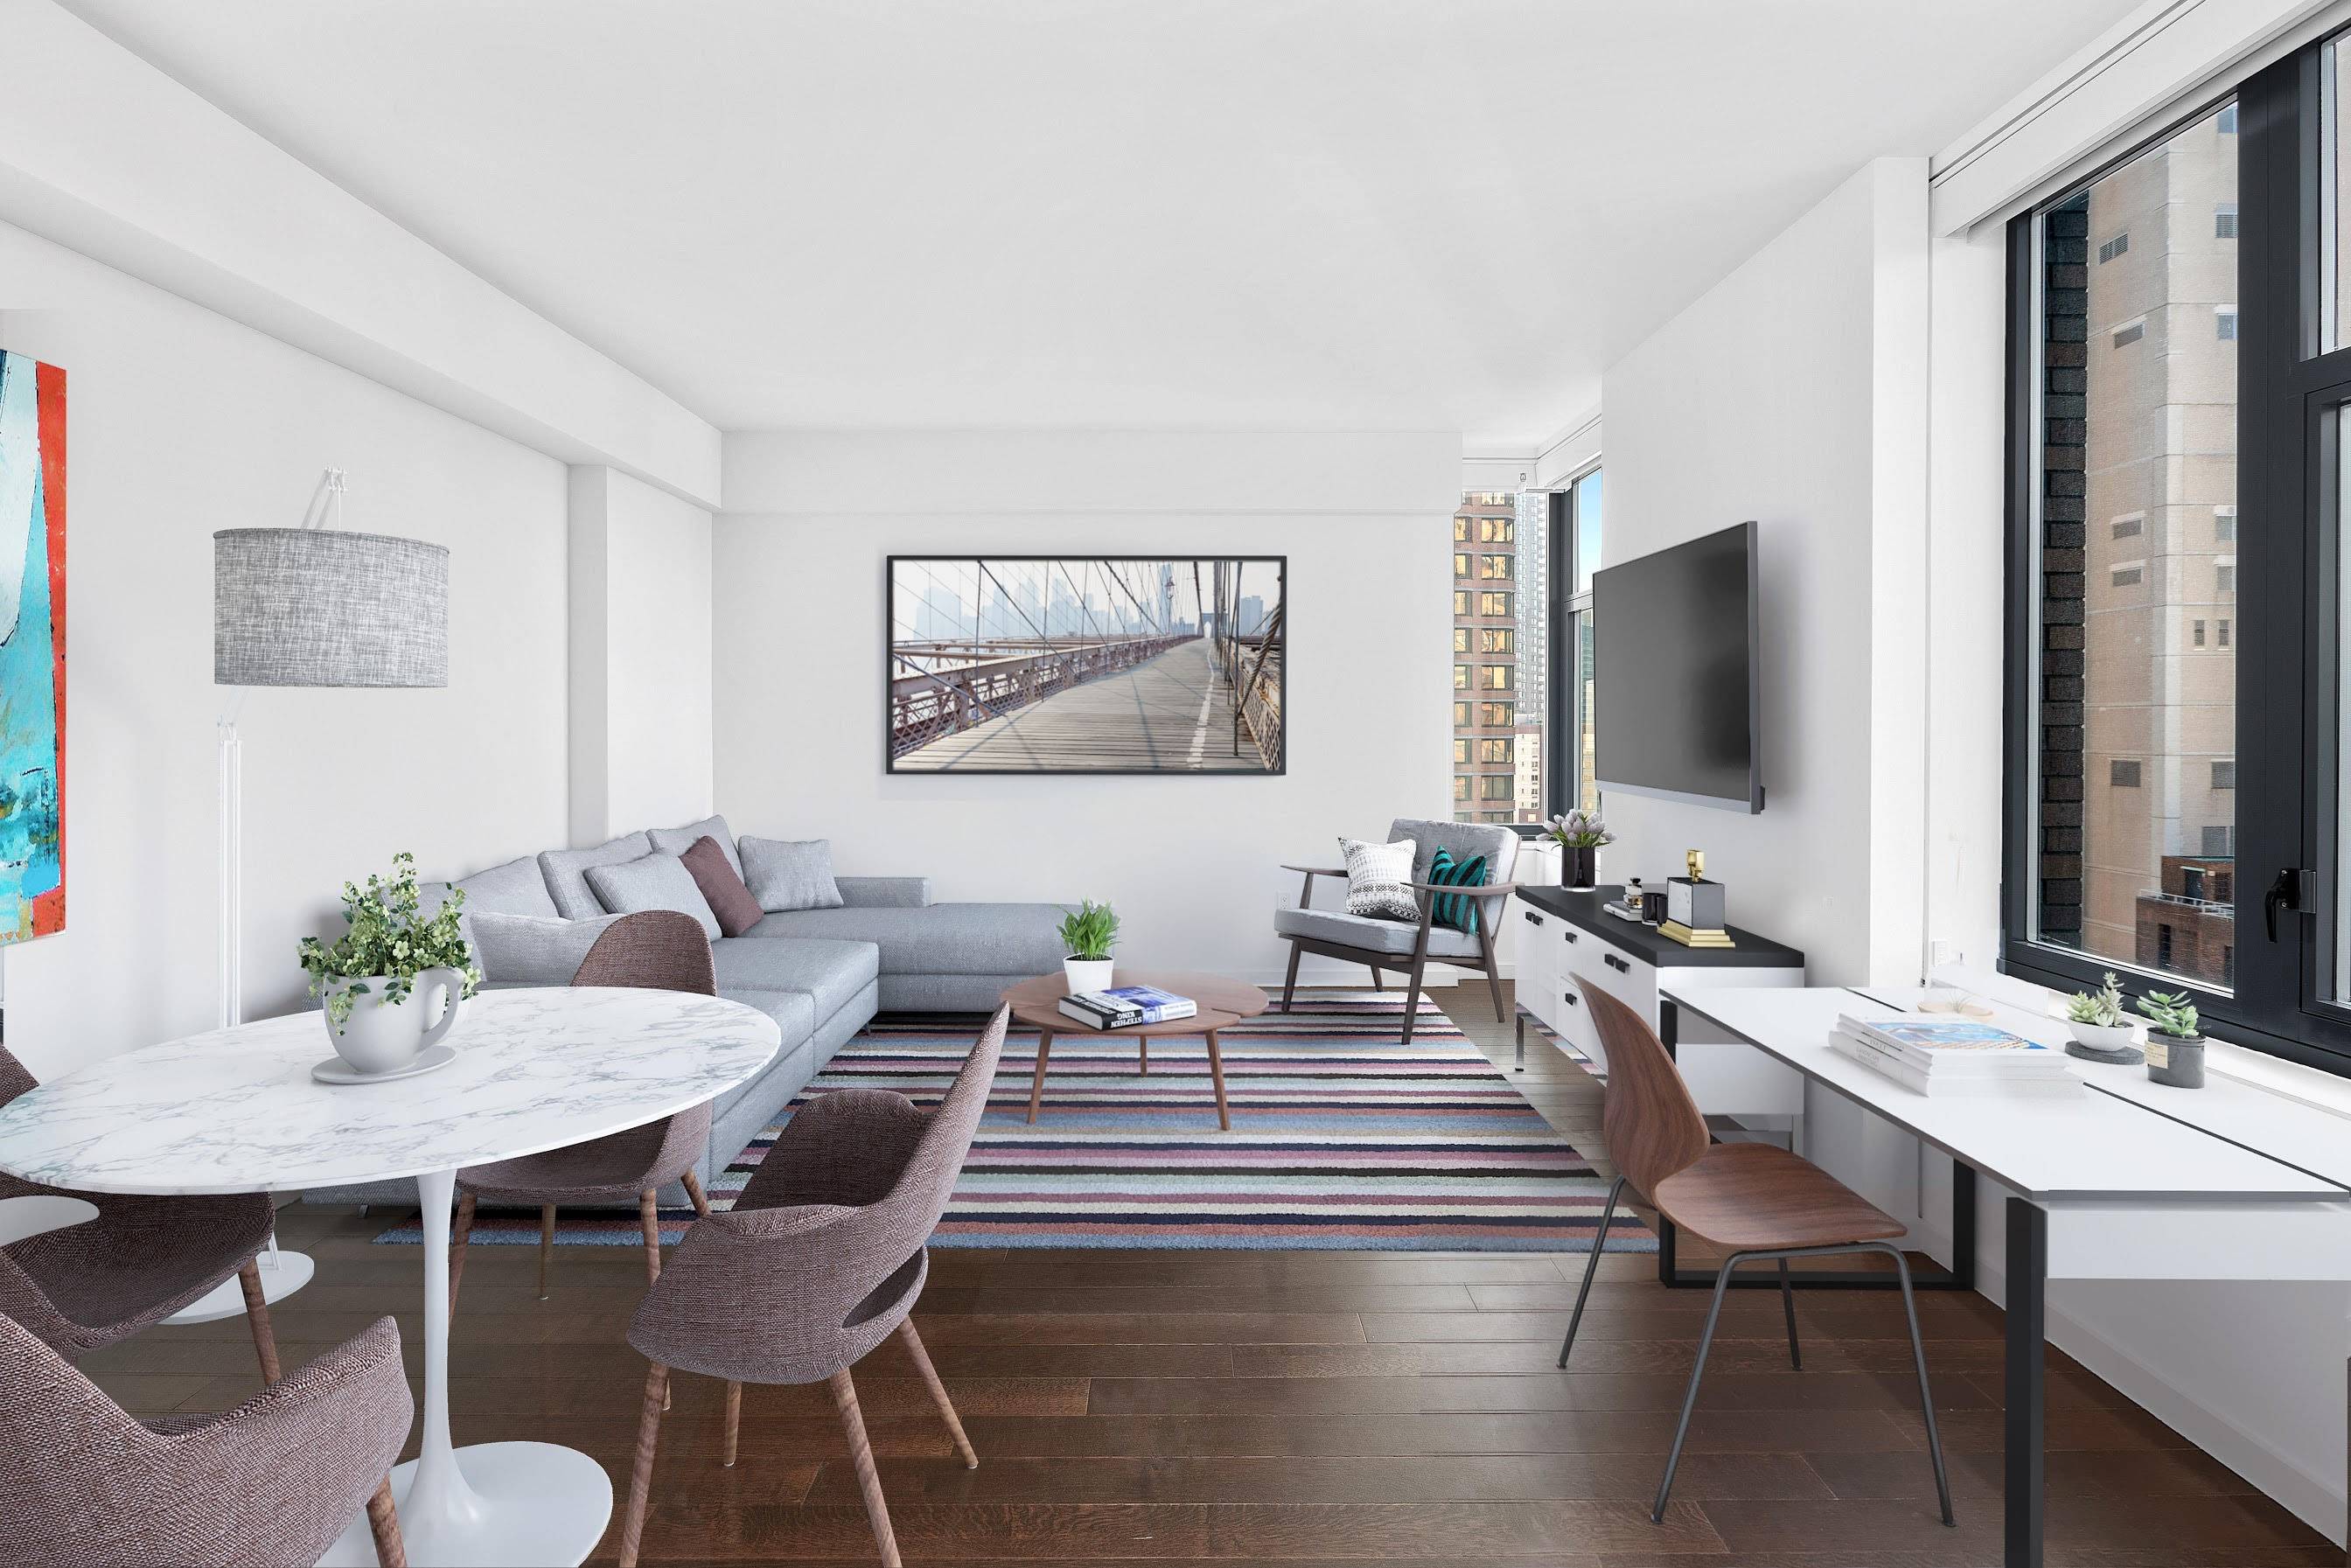 Fabulous light and Southern and Eastern city skyline with a partial river view is one of the hallmarks of this new, large 1 BR, 1 1 2 BA apartment.